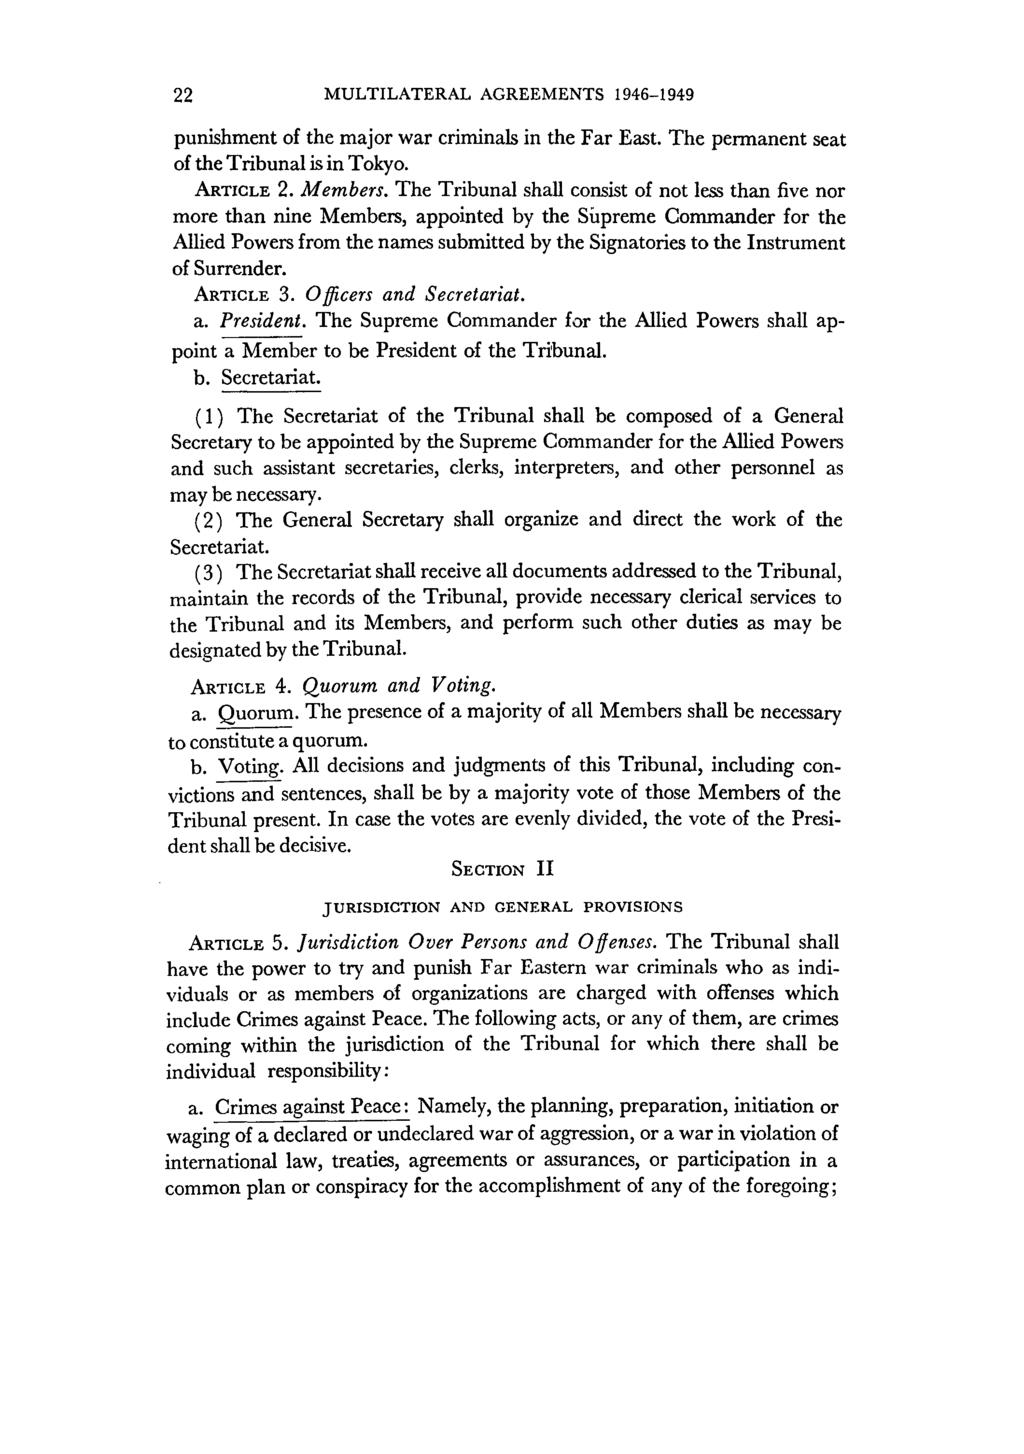 22 MULTILATERAL AGREEMENTS 1946-1949 punishment of the major war criminals in the Far East. The permanent seat of the Tribunal is in Tokyo. ARTICLE 2. Members.